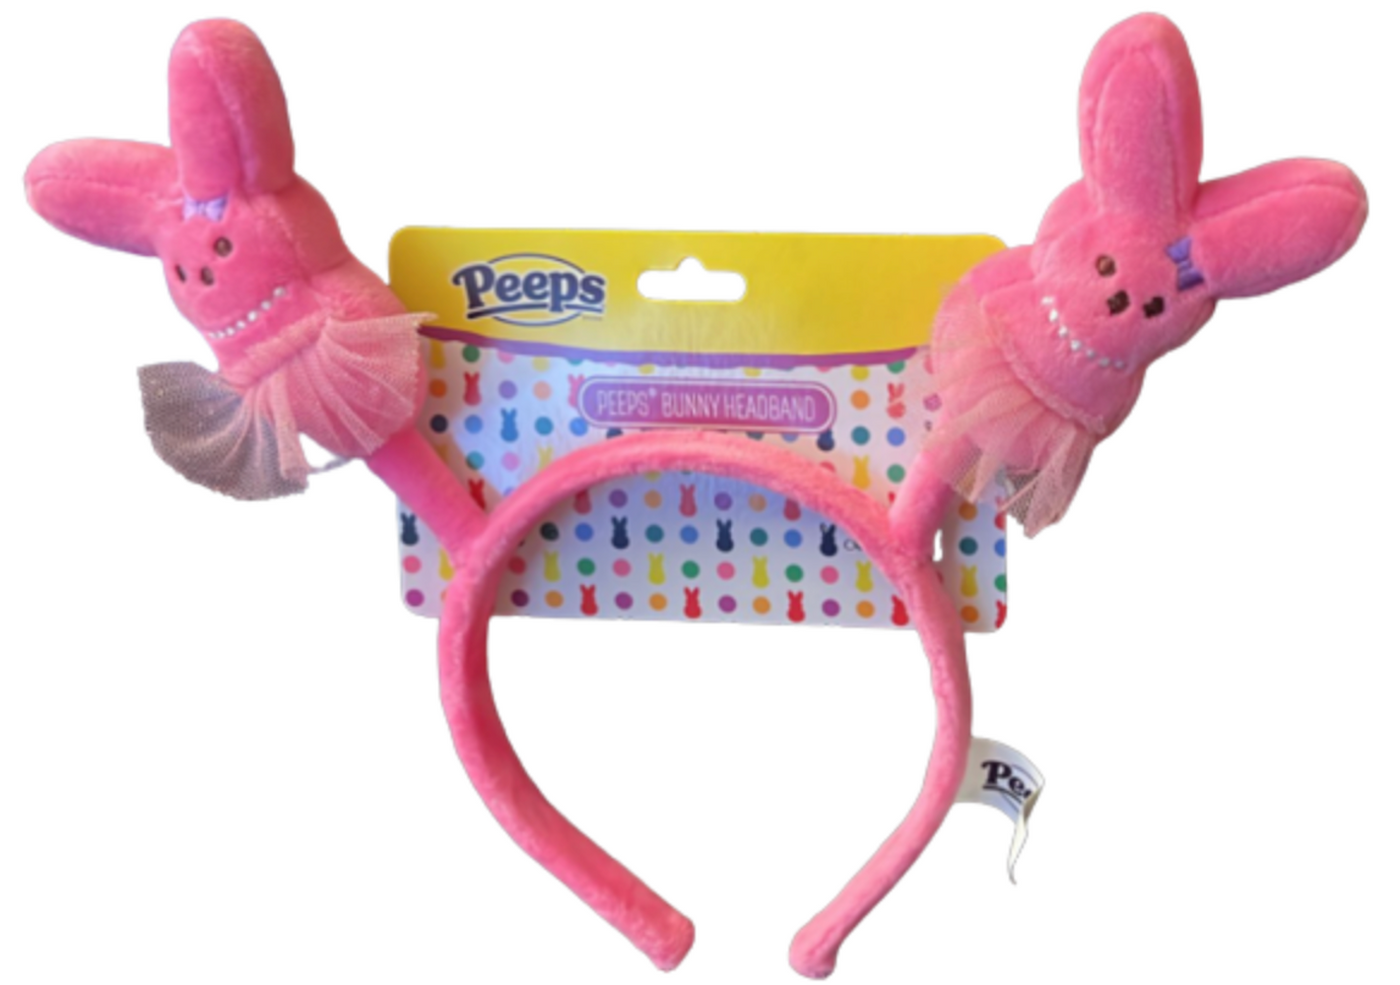 Peeps Easter Bunny Headband Pink Tulle Plush New With Tag